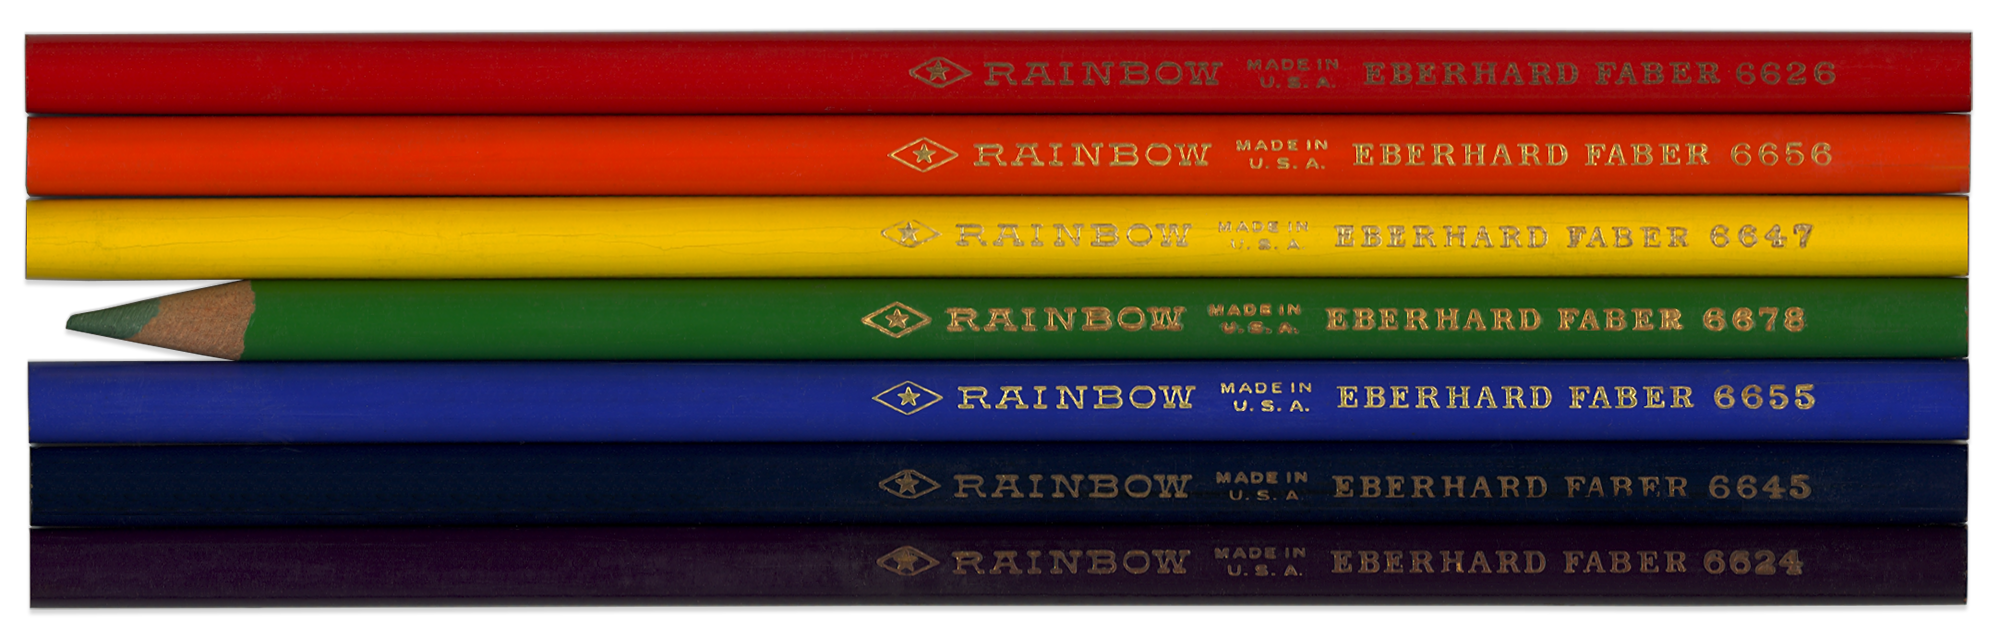 1960s Colored Pencils Set of 11 Eberhard Rainbow Map Coloring